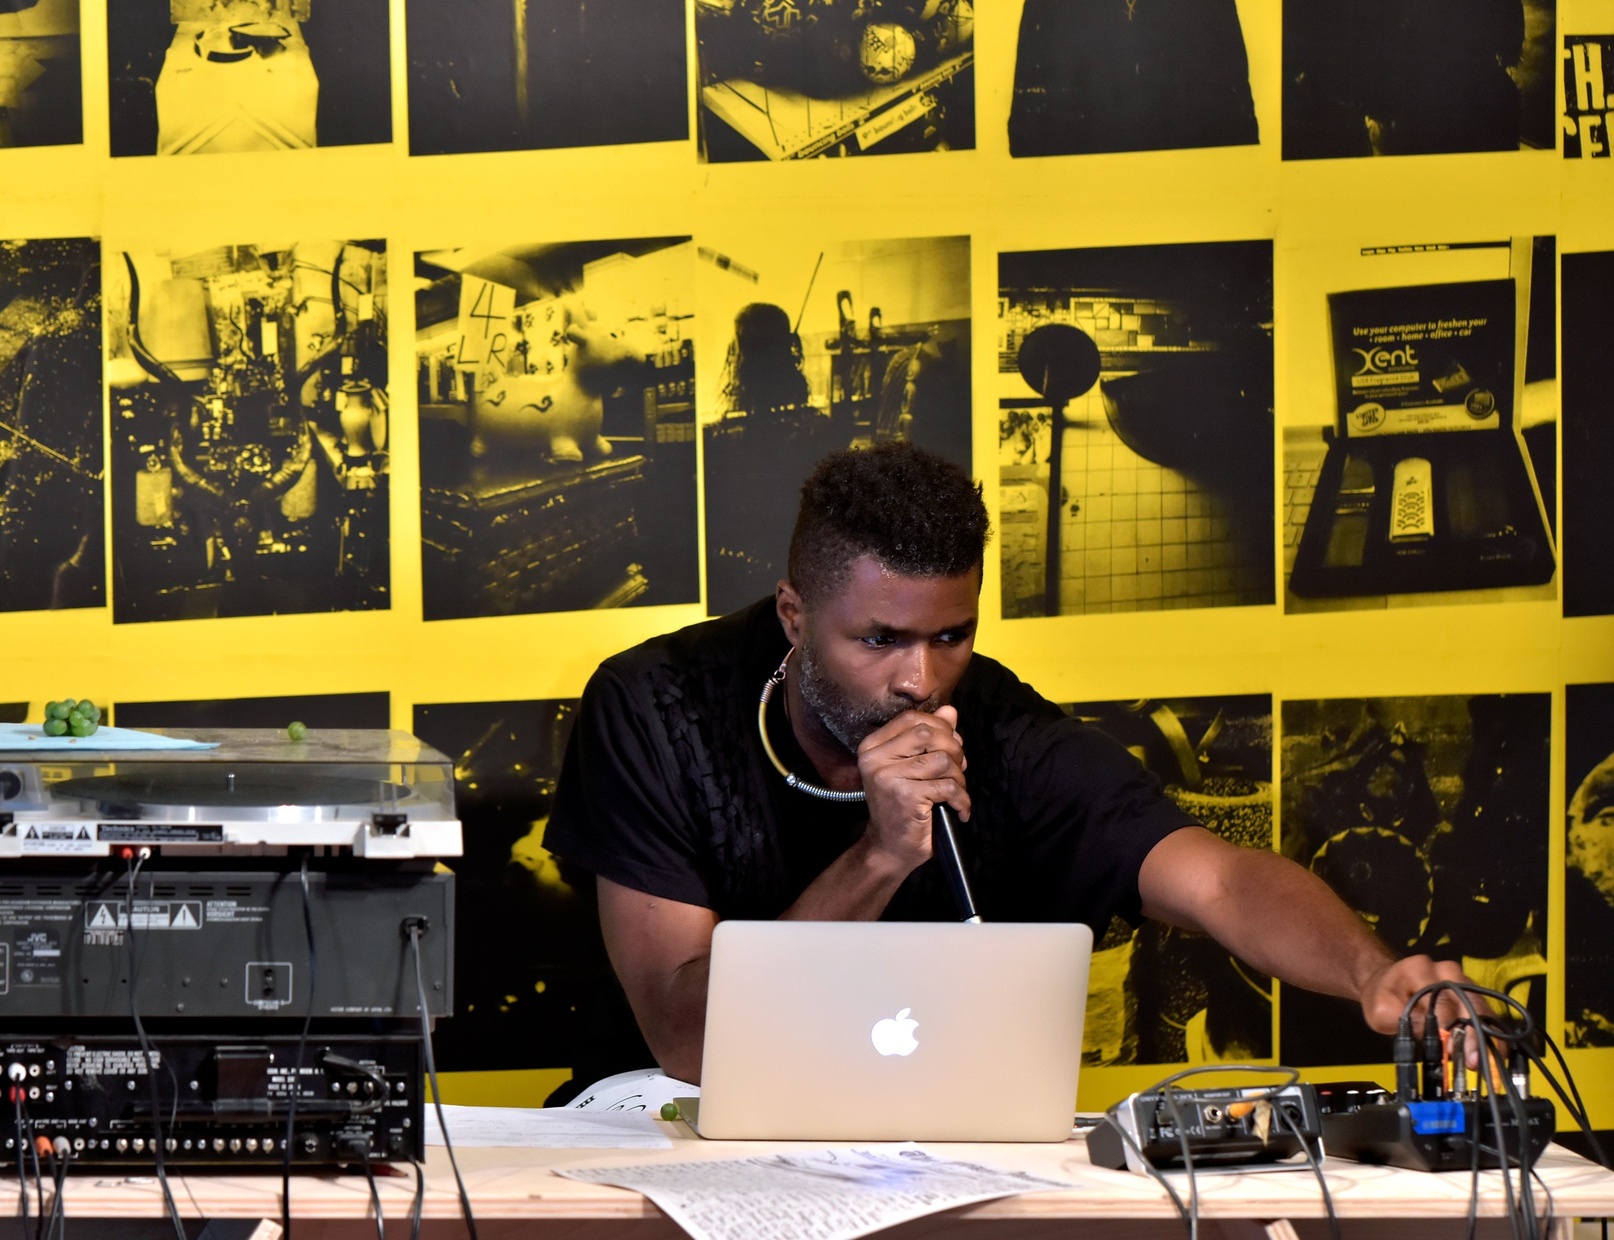 A dark-skinned man holding a mic close to his mouth looks at a laptop and adjusts a soundboard. He sits in front of a yellow wall with different scenes screenprinted in black.